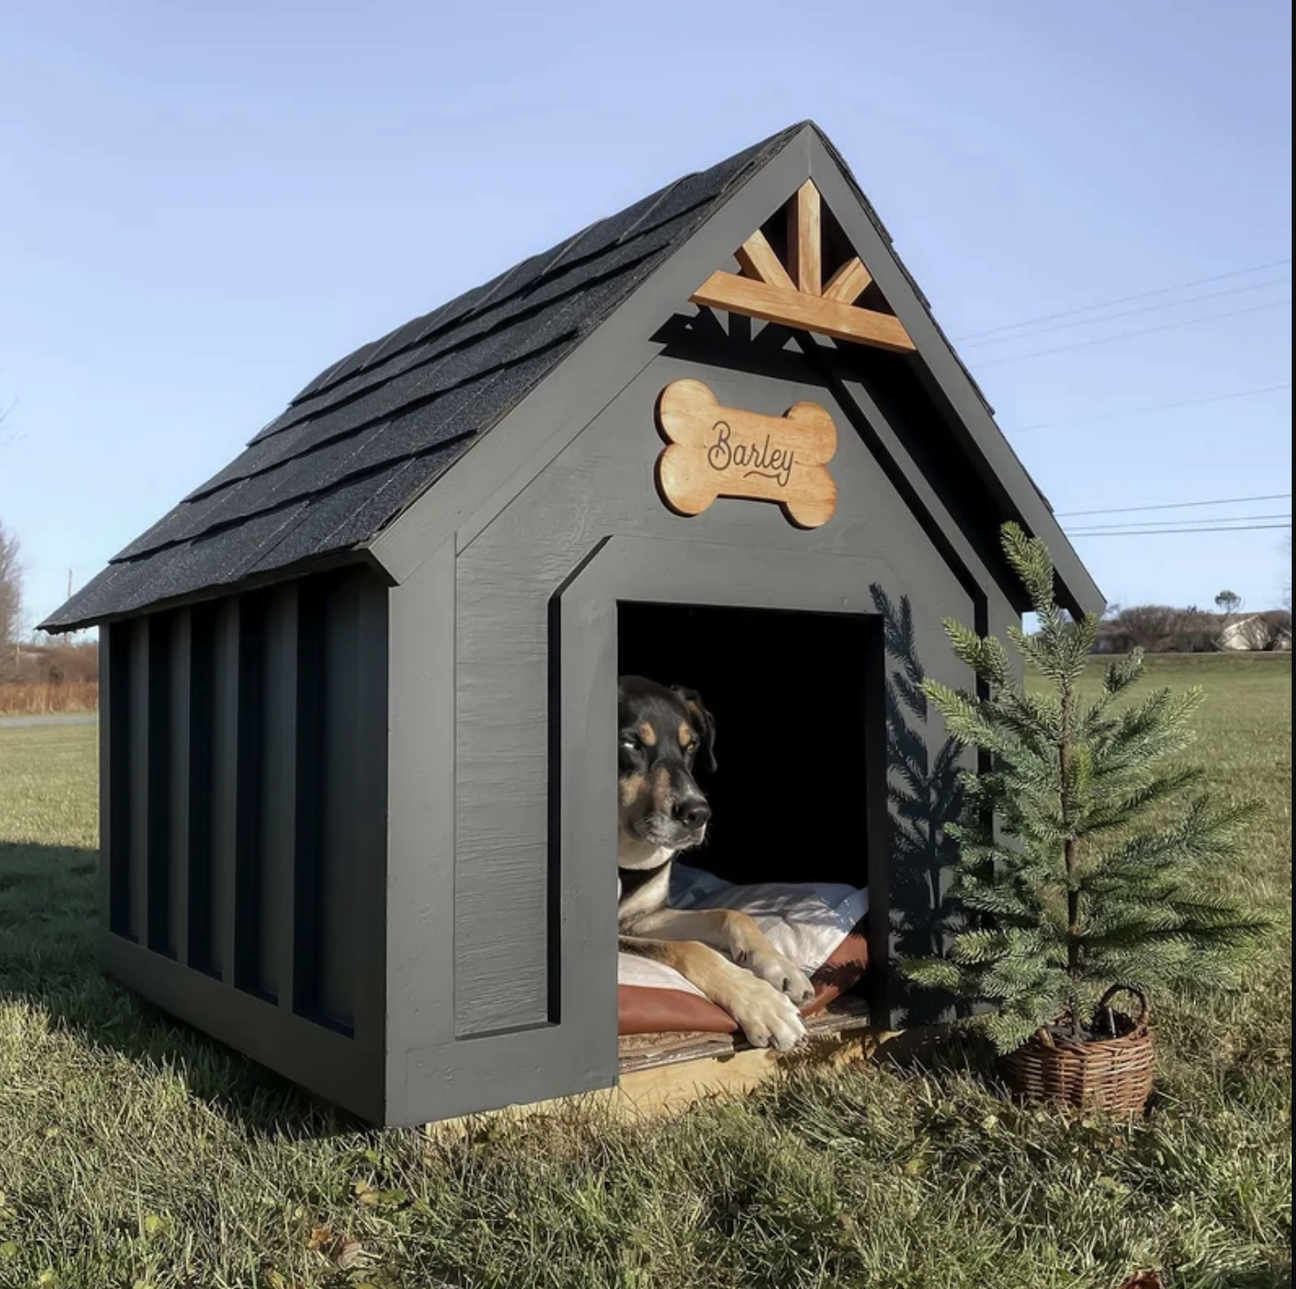 large painted wood dog house with tiny pine tree outside and a big dog sitting inside in the middle of a field